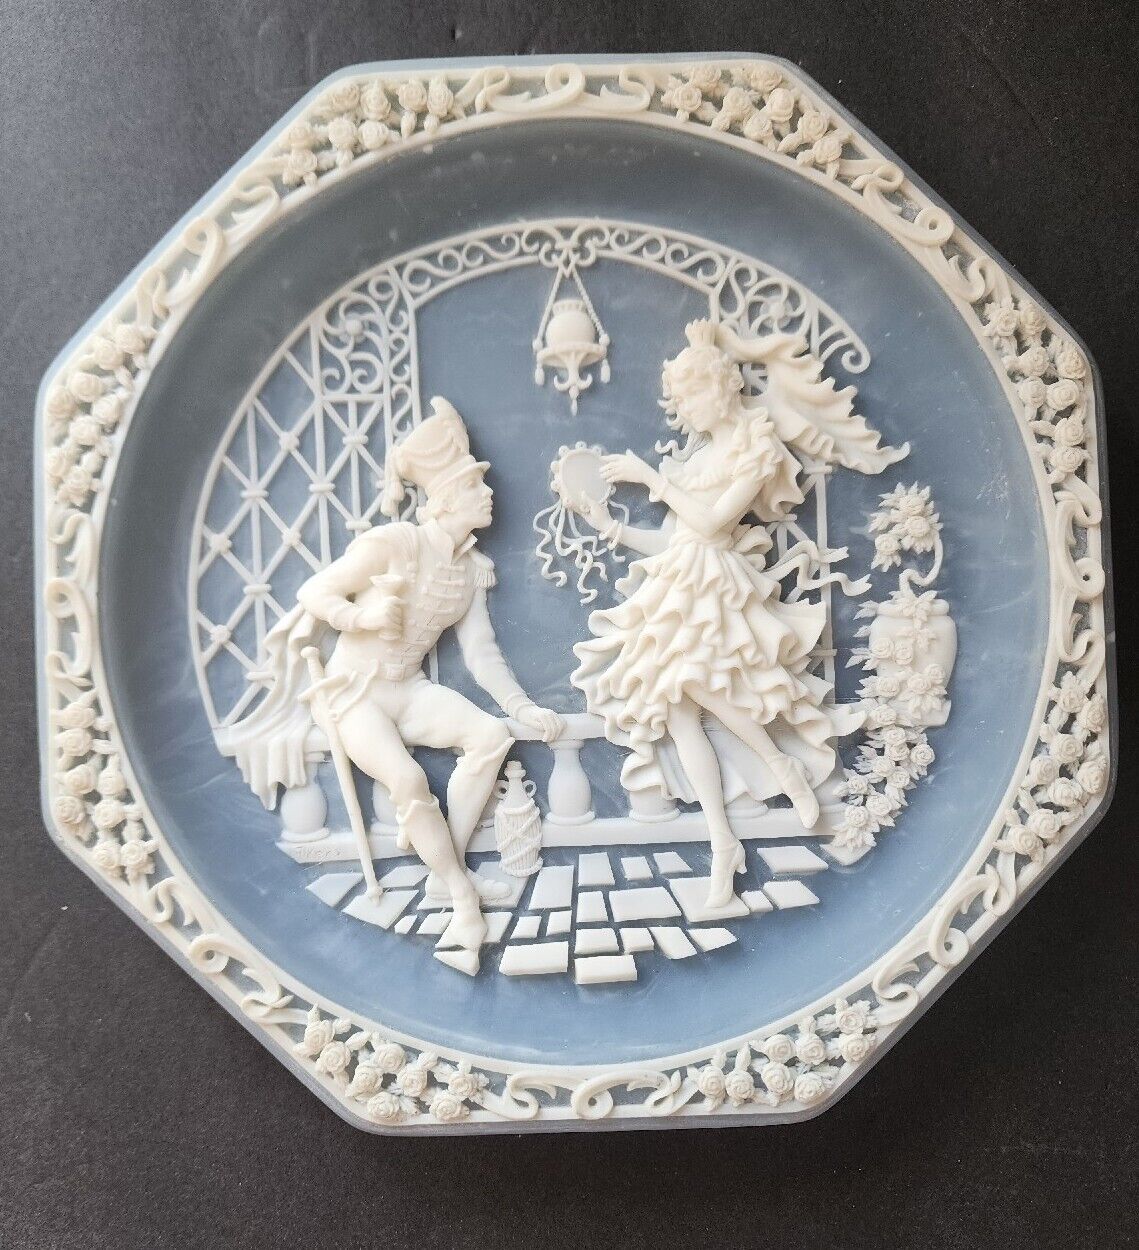 Akers 1990 Carmen Handcrafted Cameo Carving Sapphire Incolay Stone Octagon Plate